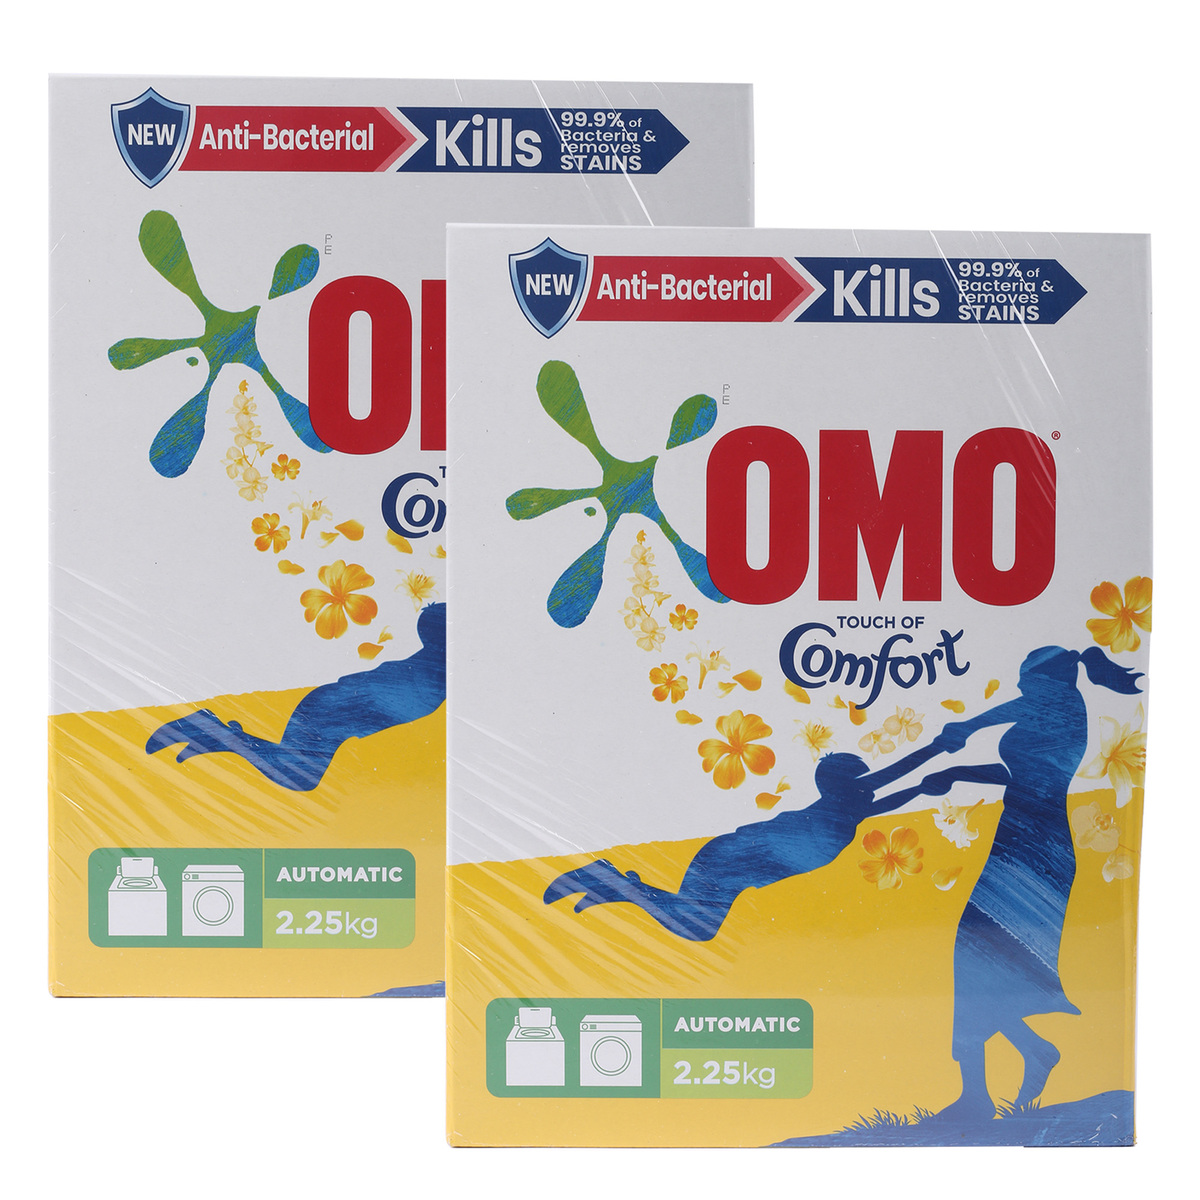 Omo Touch of Comfort Anti-Bacterial Automatic Washing Powder 2 x 2.25 kg